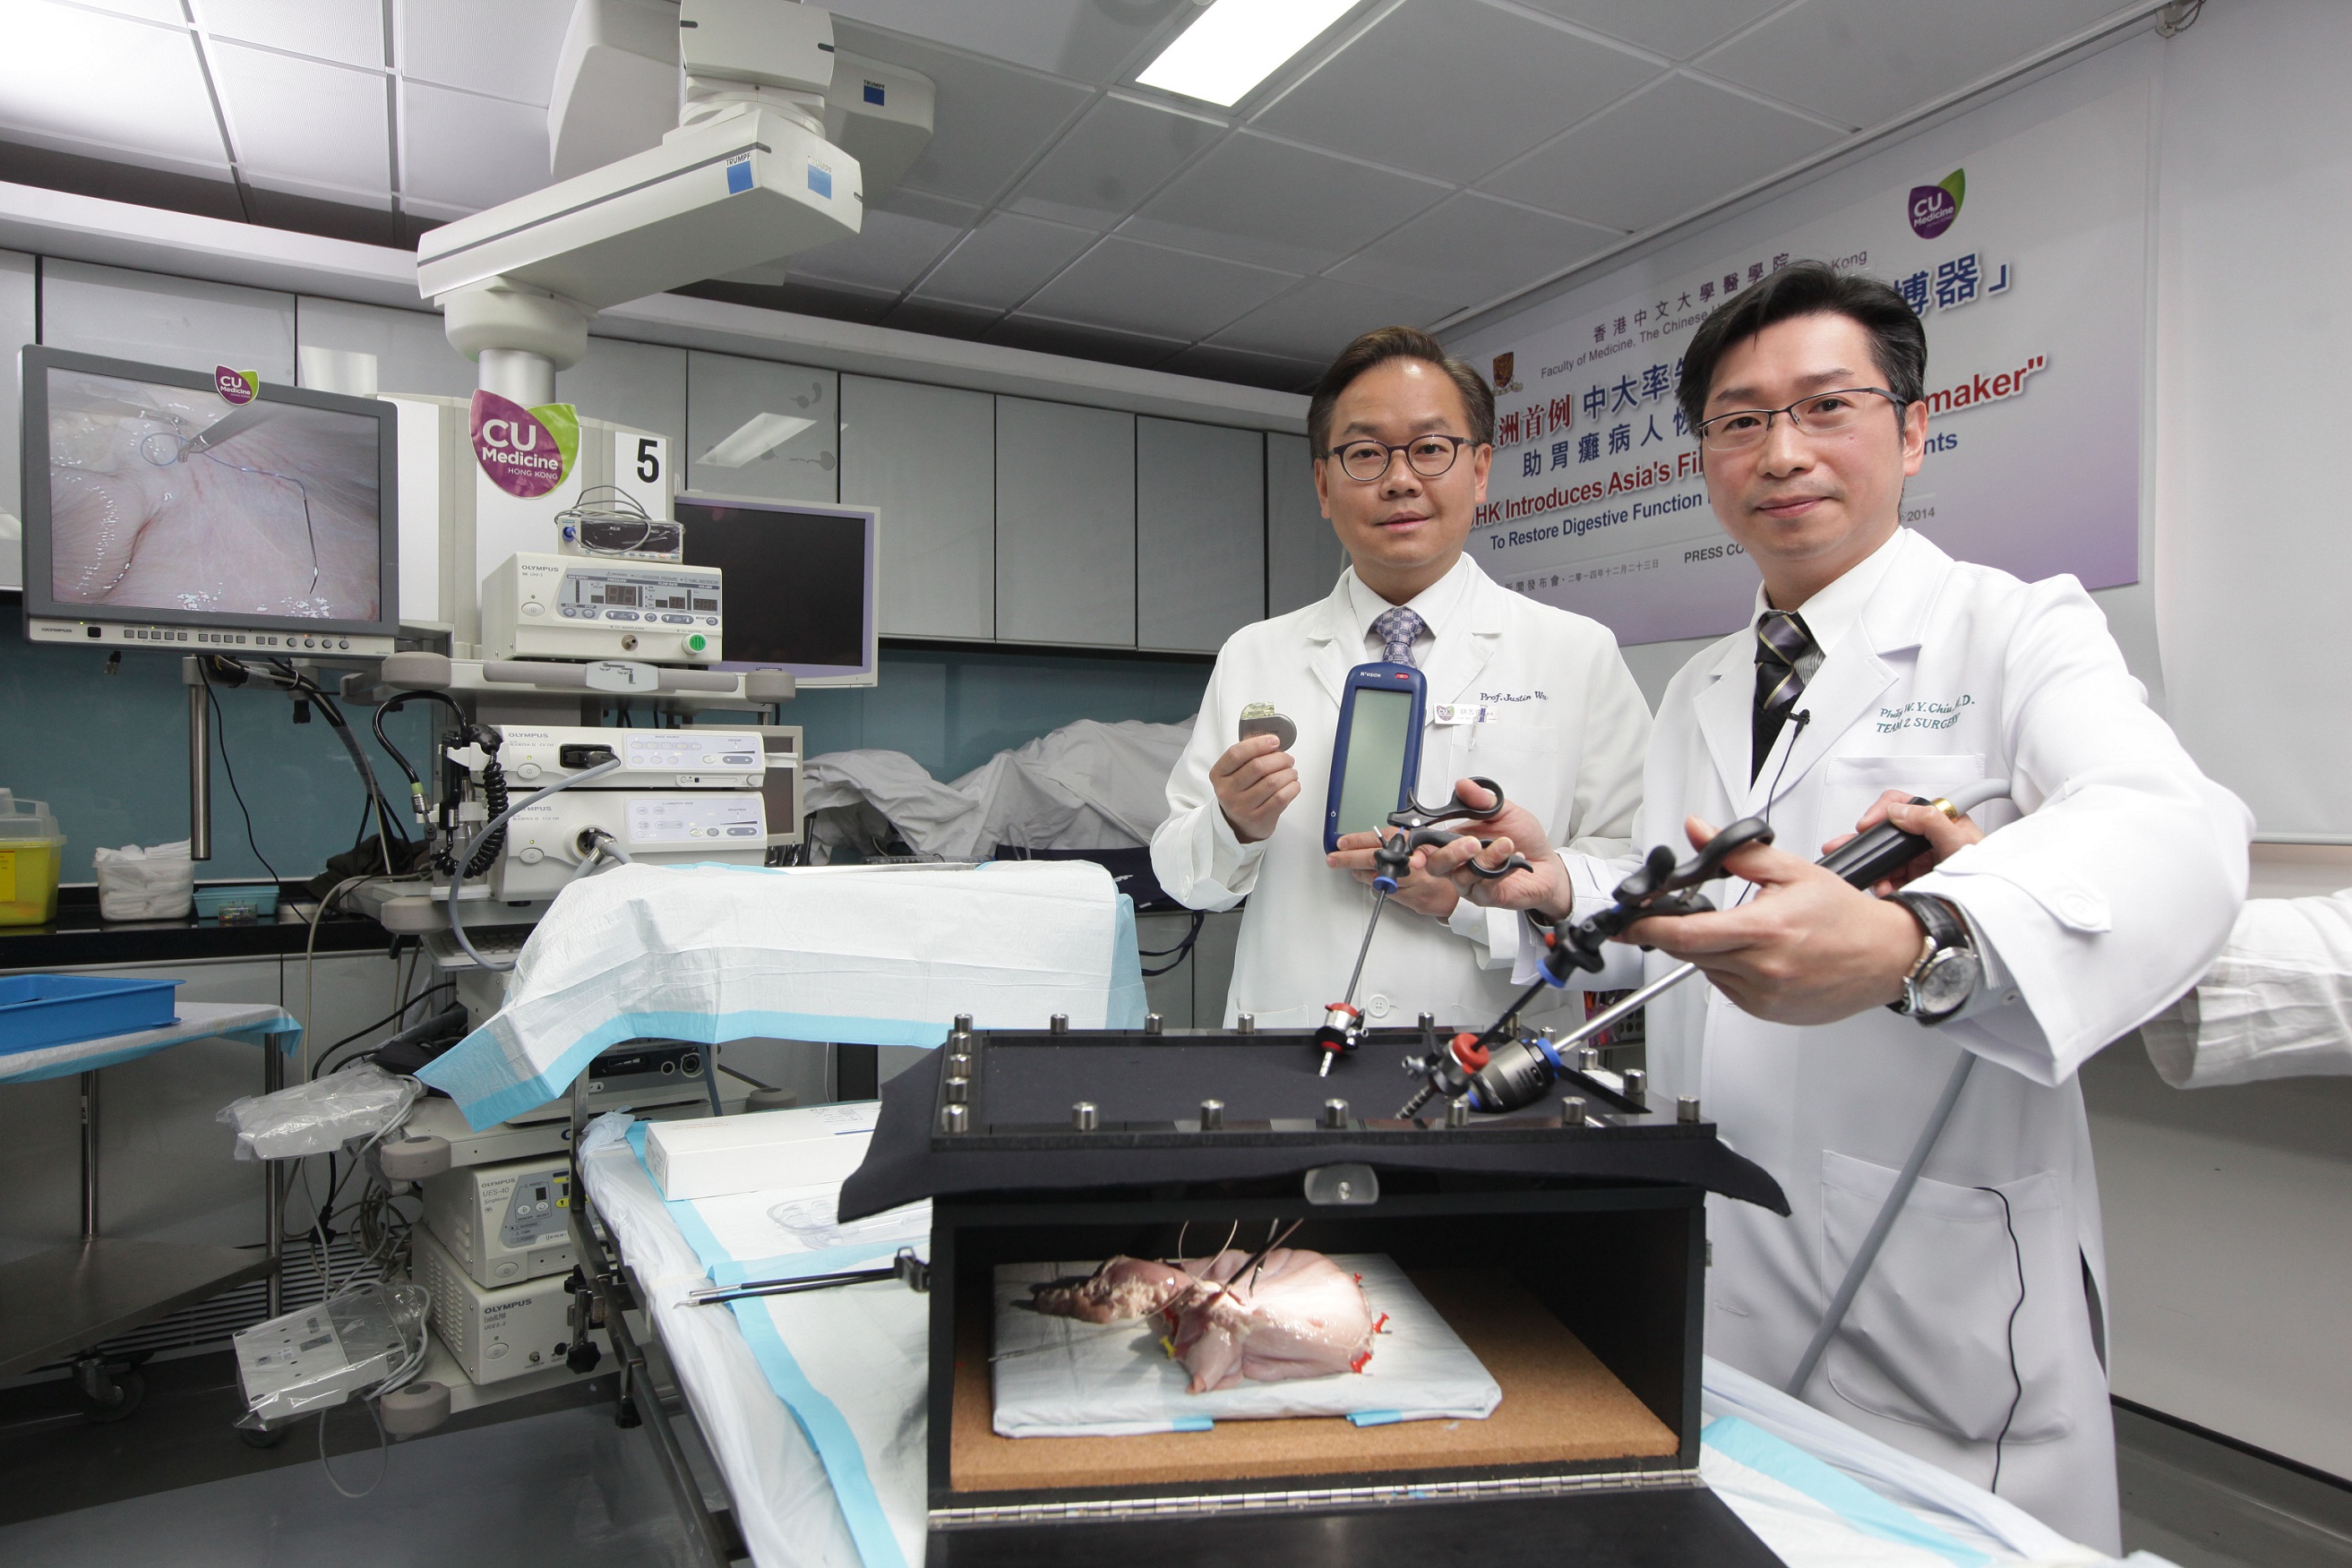 Professor Philip Chiu (right) demonstrates the laparoscopic implantation of a “Gastric Pacemaker”